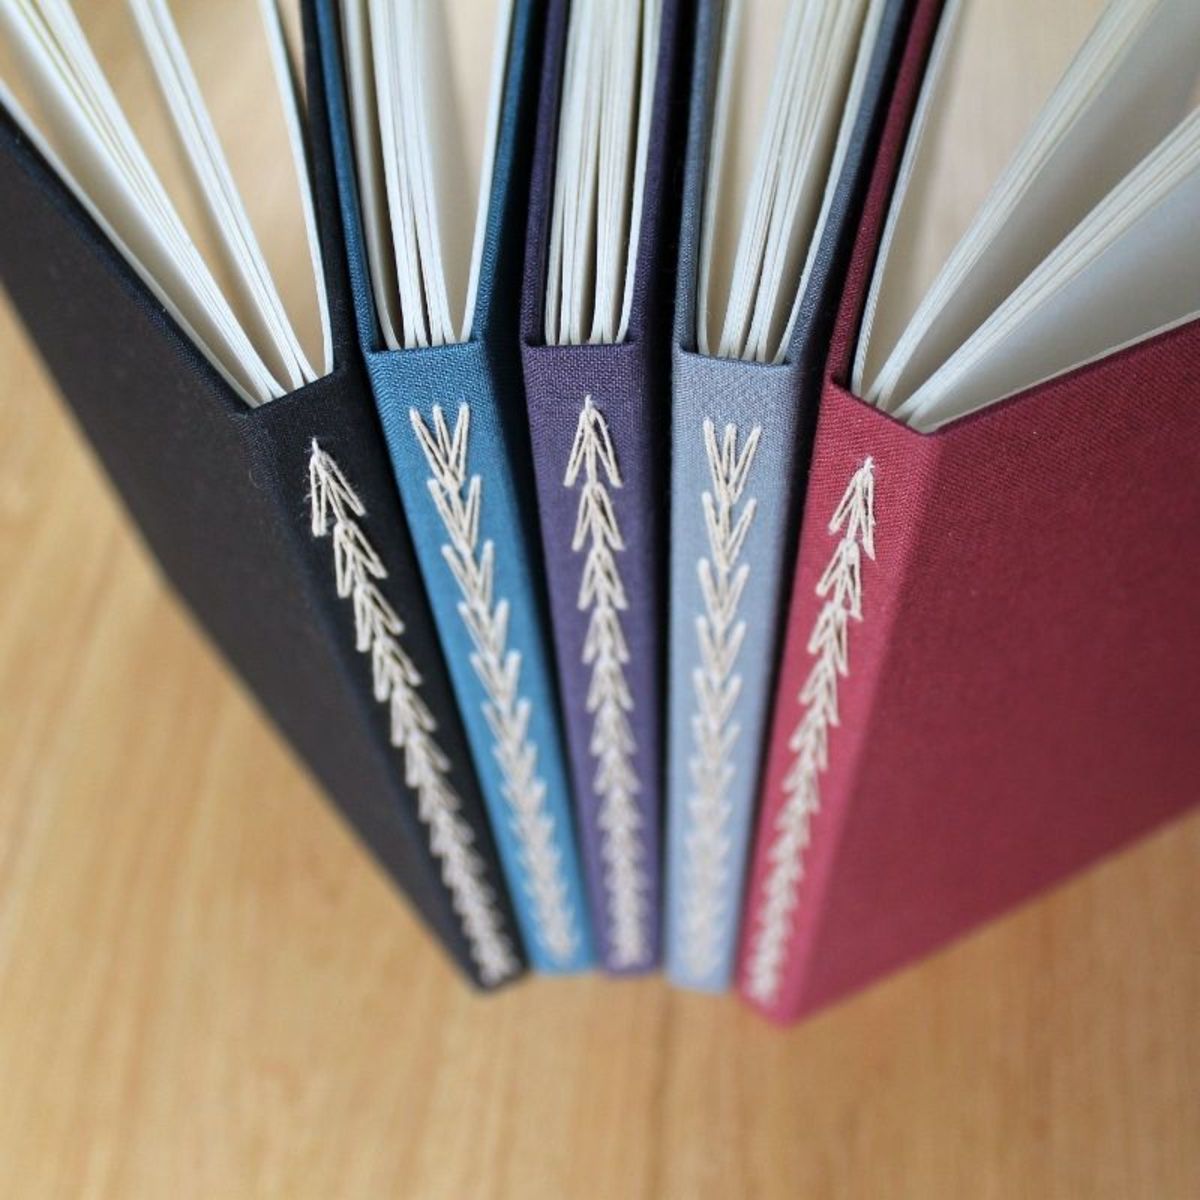 There are many options to binding your journals